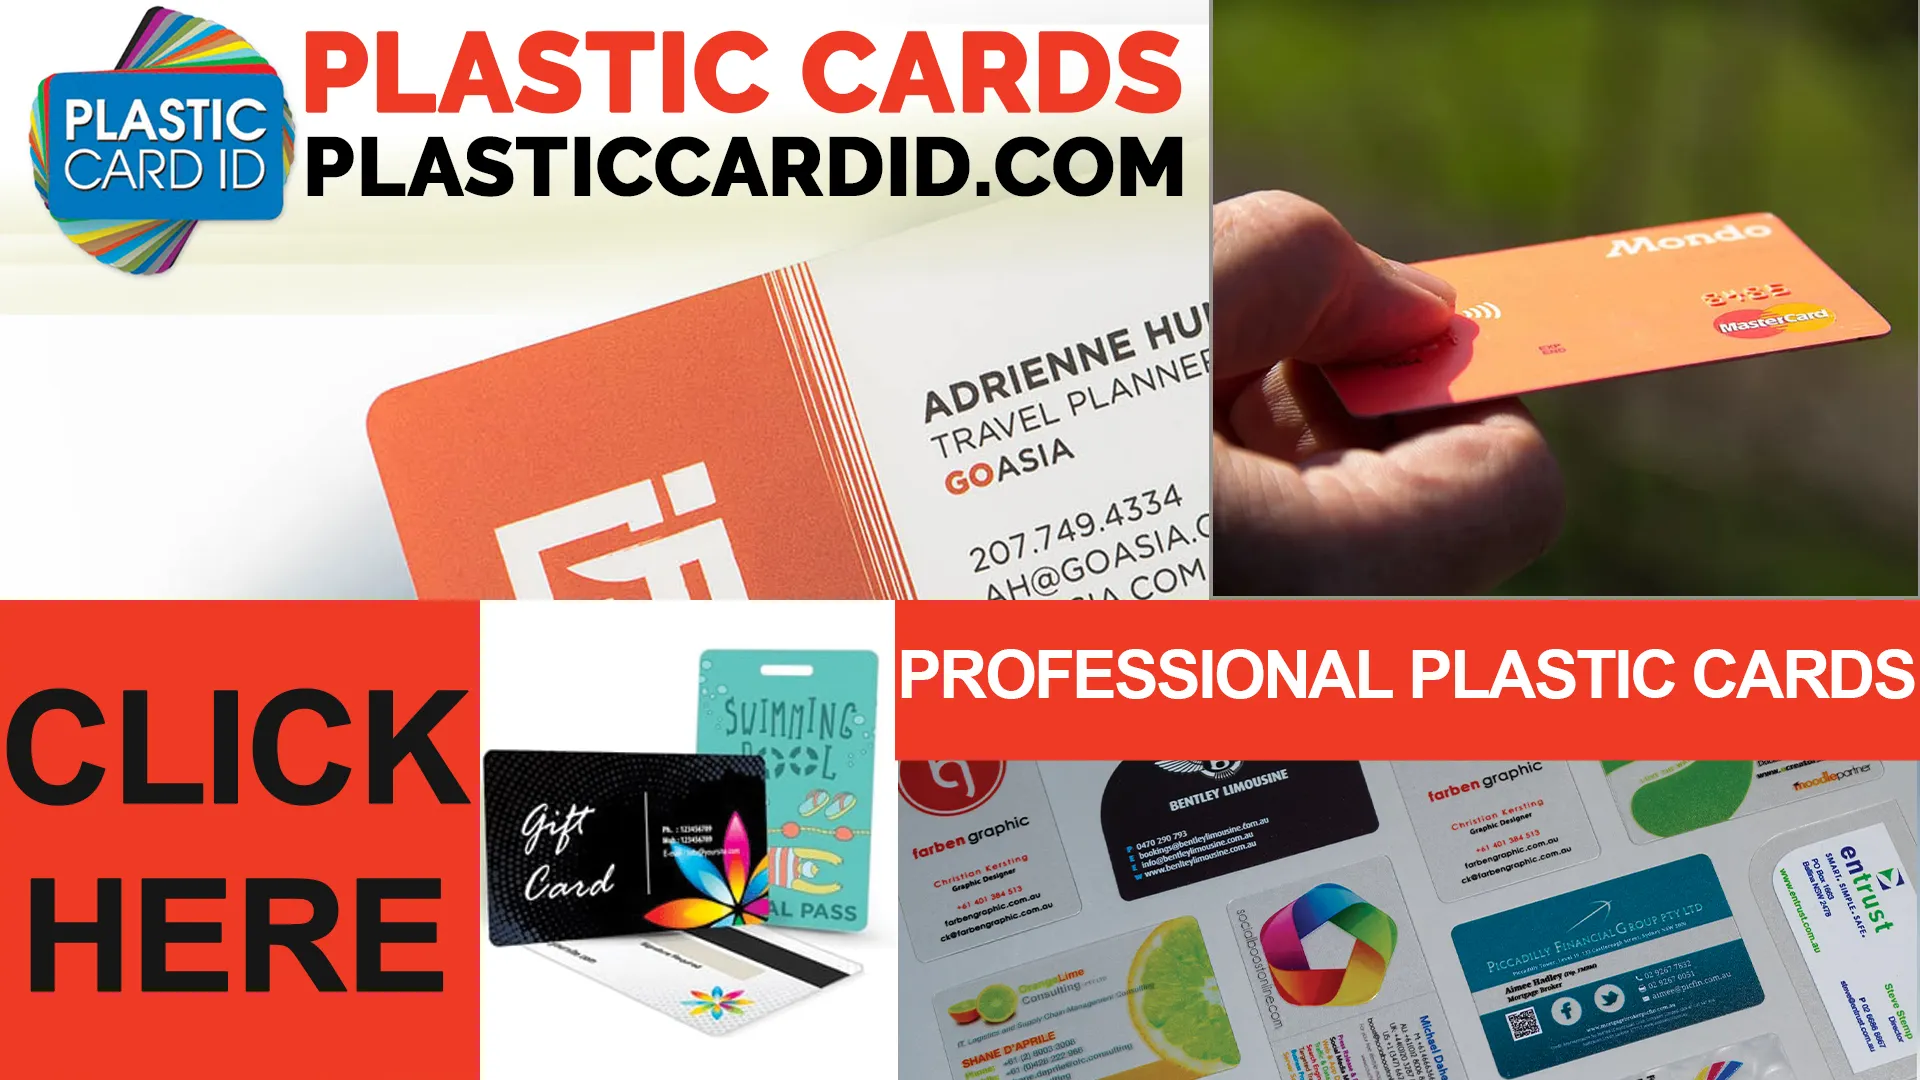 Plastic Cards for Every Purpose